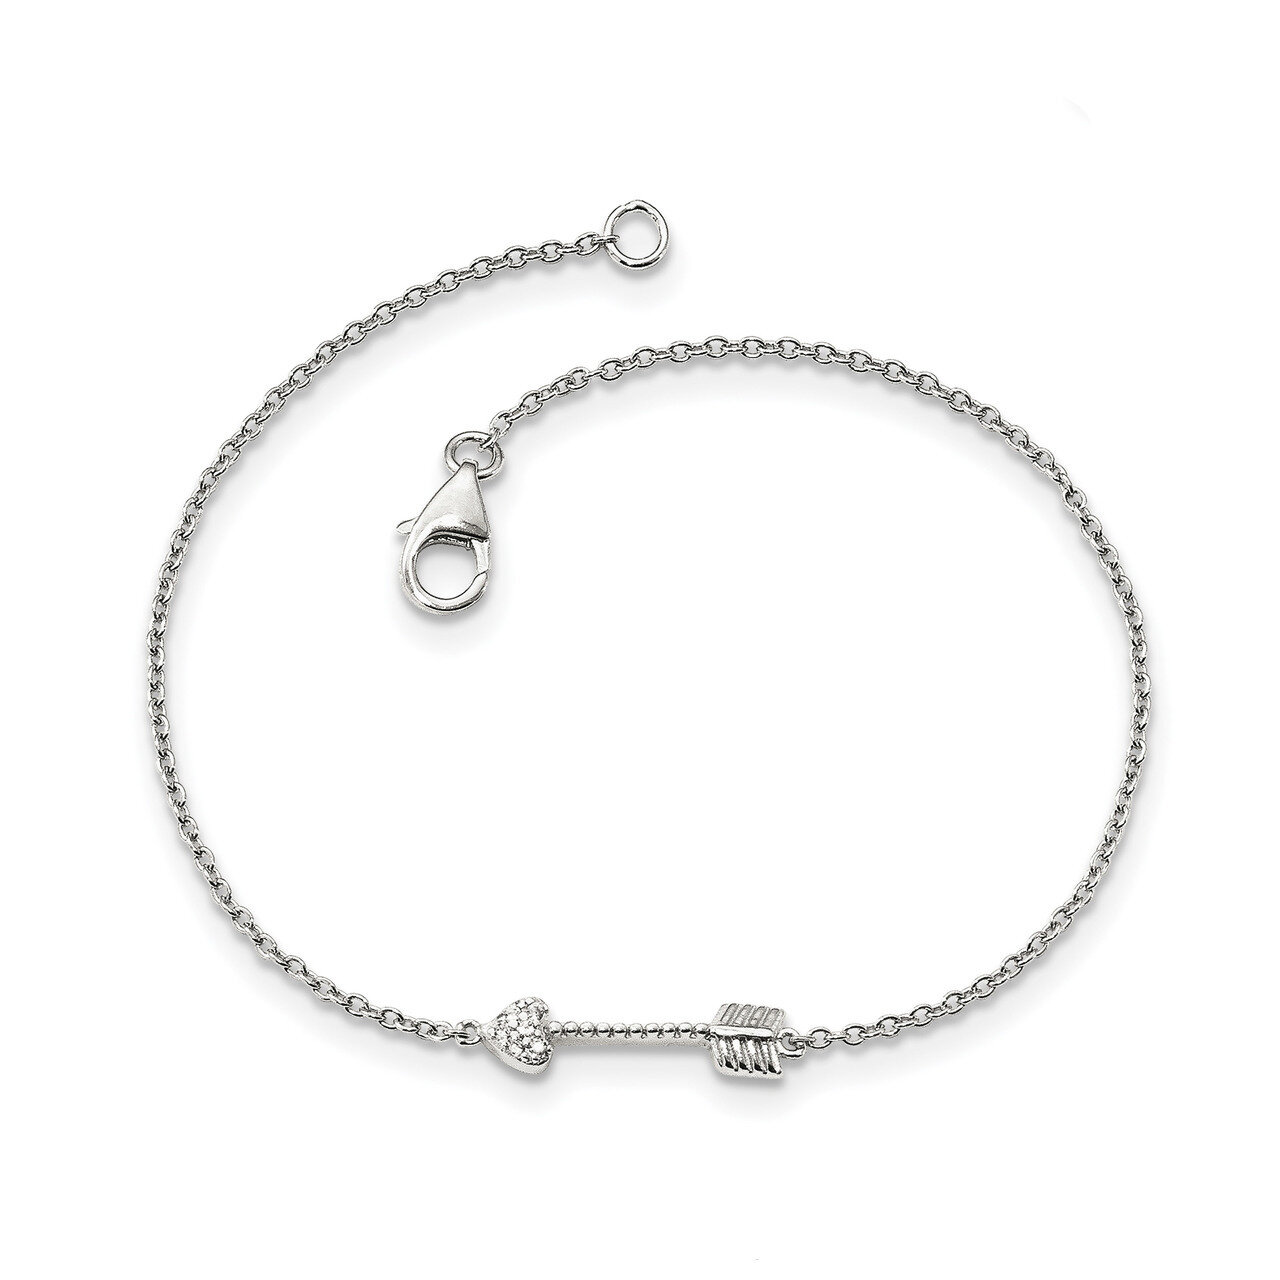 Arrowith Heart with CZ Diamond Bracelet 7 Inch Sterling Silver Polished QG3607-7